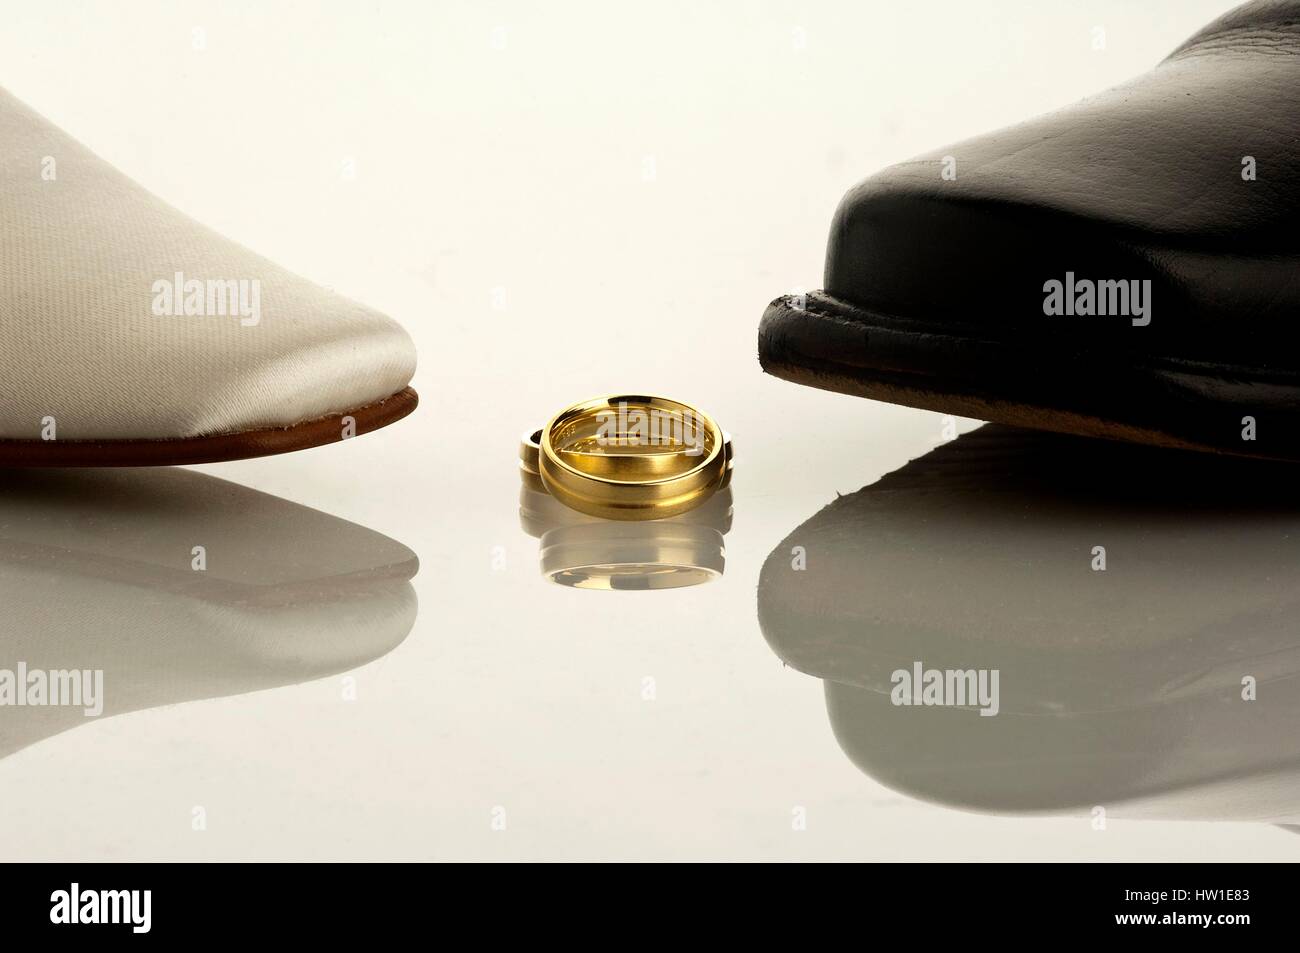 Wedding shoes and rings, Hochzeitsschuhe und Ringe Stock Photo